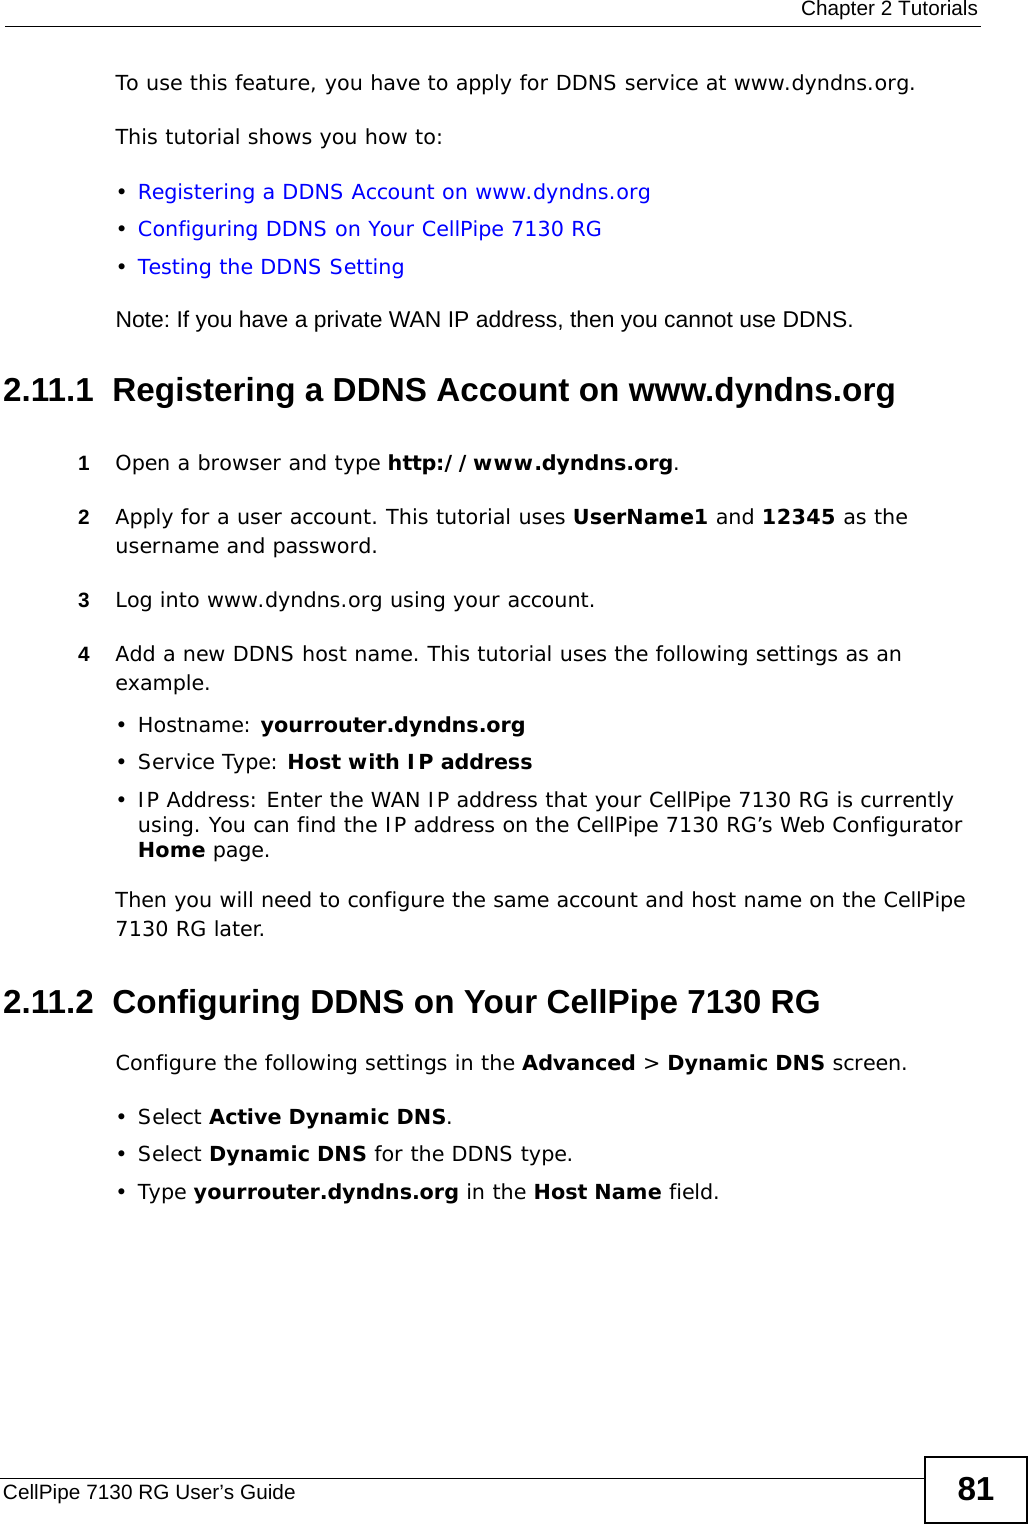  Chapter 2 TutorialsCellPipe 7130 RG User’s Guide 81To use this feature, you have to apply for DDNS service at www.dyndns.org.This tutorial shows you how to:•Registering a DDNS Account on www.dyndns.org•Configuring DDNS on Your CellPipe 7130 RG•Testing the DDNS SettingNote: If you have a private WAN IP address, then you cannot use DDNS.2.11.1  Registering a DDNS Account on www.dyndns.org1Open a browser and type http://www.dyndns.org.2Apply for a user account. This tutorial uses UserName1 and 12345 as the username and password.3Log into www.dyndns.org using your account.4Add a new DDNS host name. This tutorial uses the following settings as an example.• Hostname: yourrouter.dyndns.org•Service Type: Host with IP address• IP Address: Enter the WAN IP address that your CellPipe 7130 RG is currently using. You can find the IP address on the CellPipe 7130 RG’s Web Configurator Home page.Then you will need to configure the same account and host name on the CellPipe 7130 RG later.2.11.2  Configuring DDNS on Your CellPipe 7130 RGConfigure the following settings in the Advanced &gt; Dynamic DNS screen.• Select Active Dynamic DNS.• Select Dynamic DNS for the DDNS type.•Type yourrouter.dyndns.org in the Host Name field.